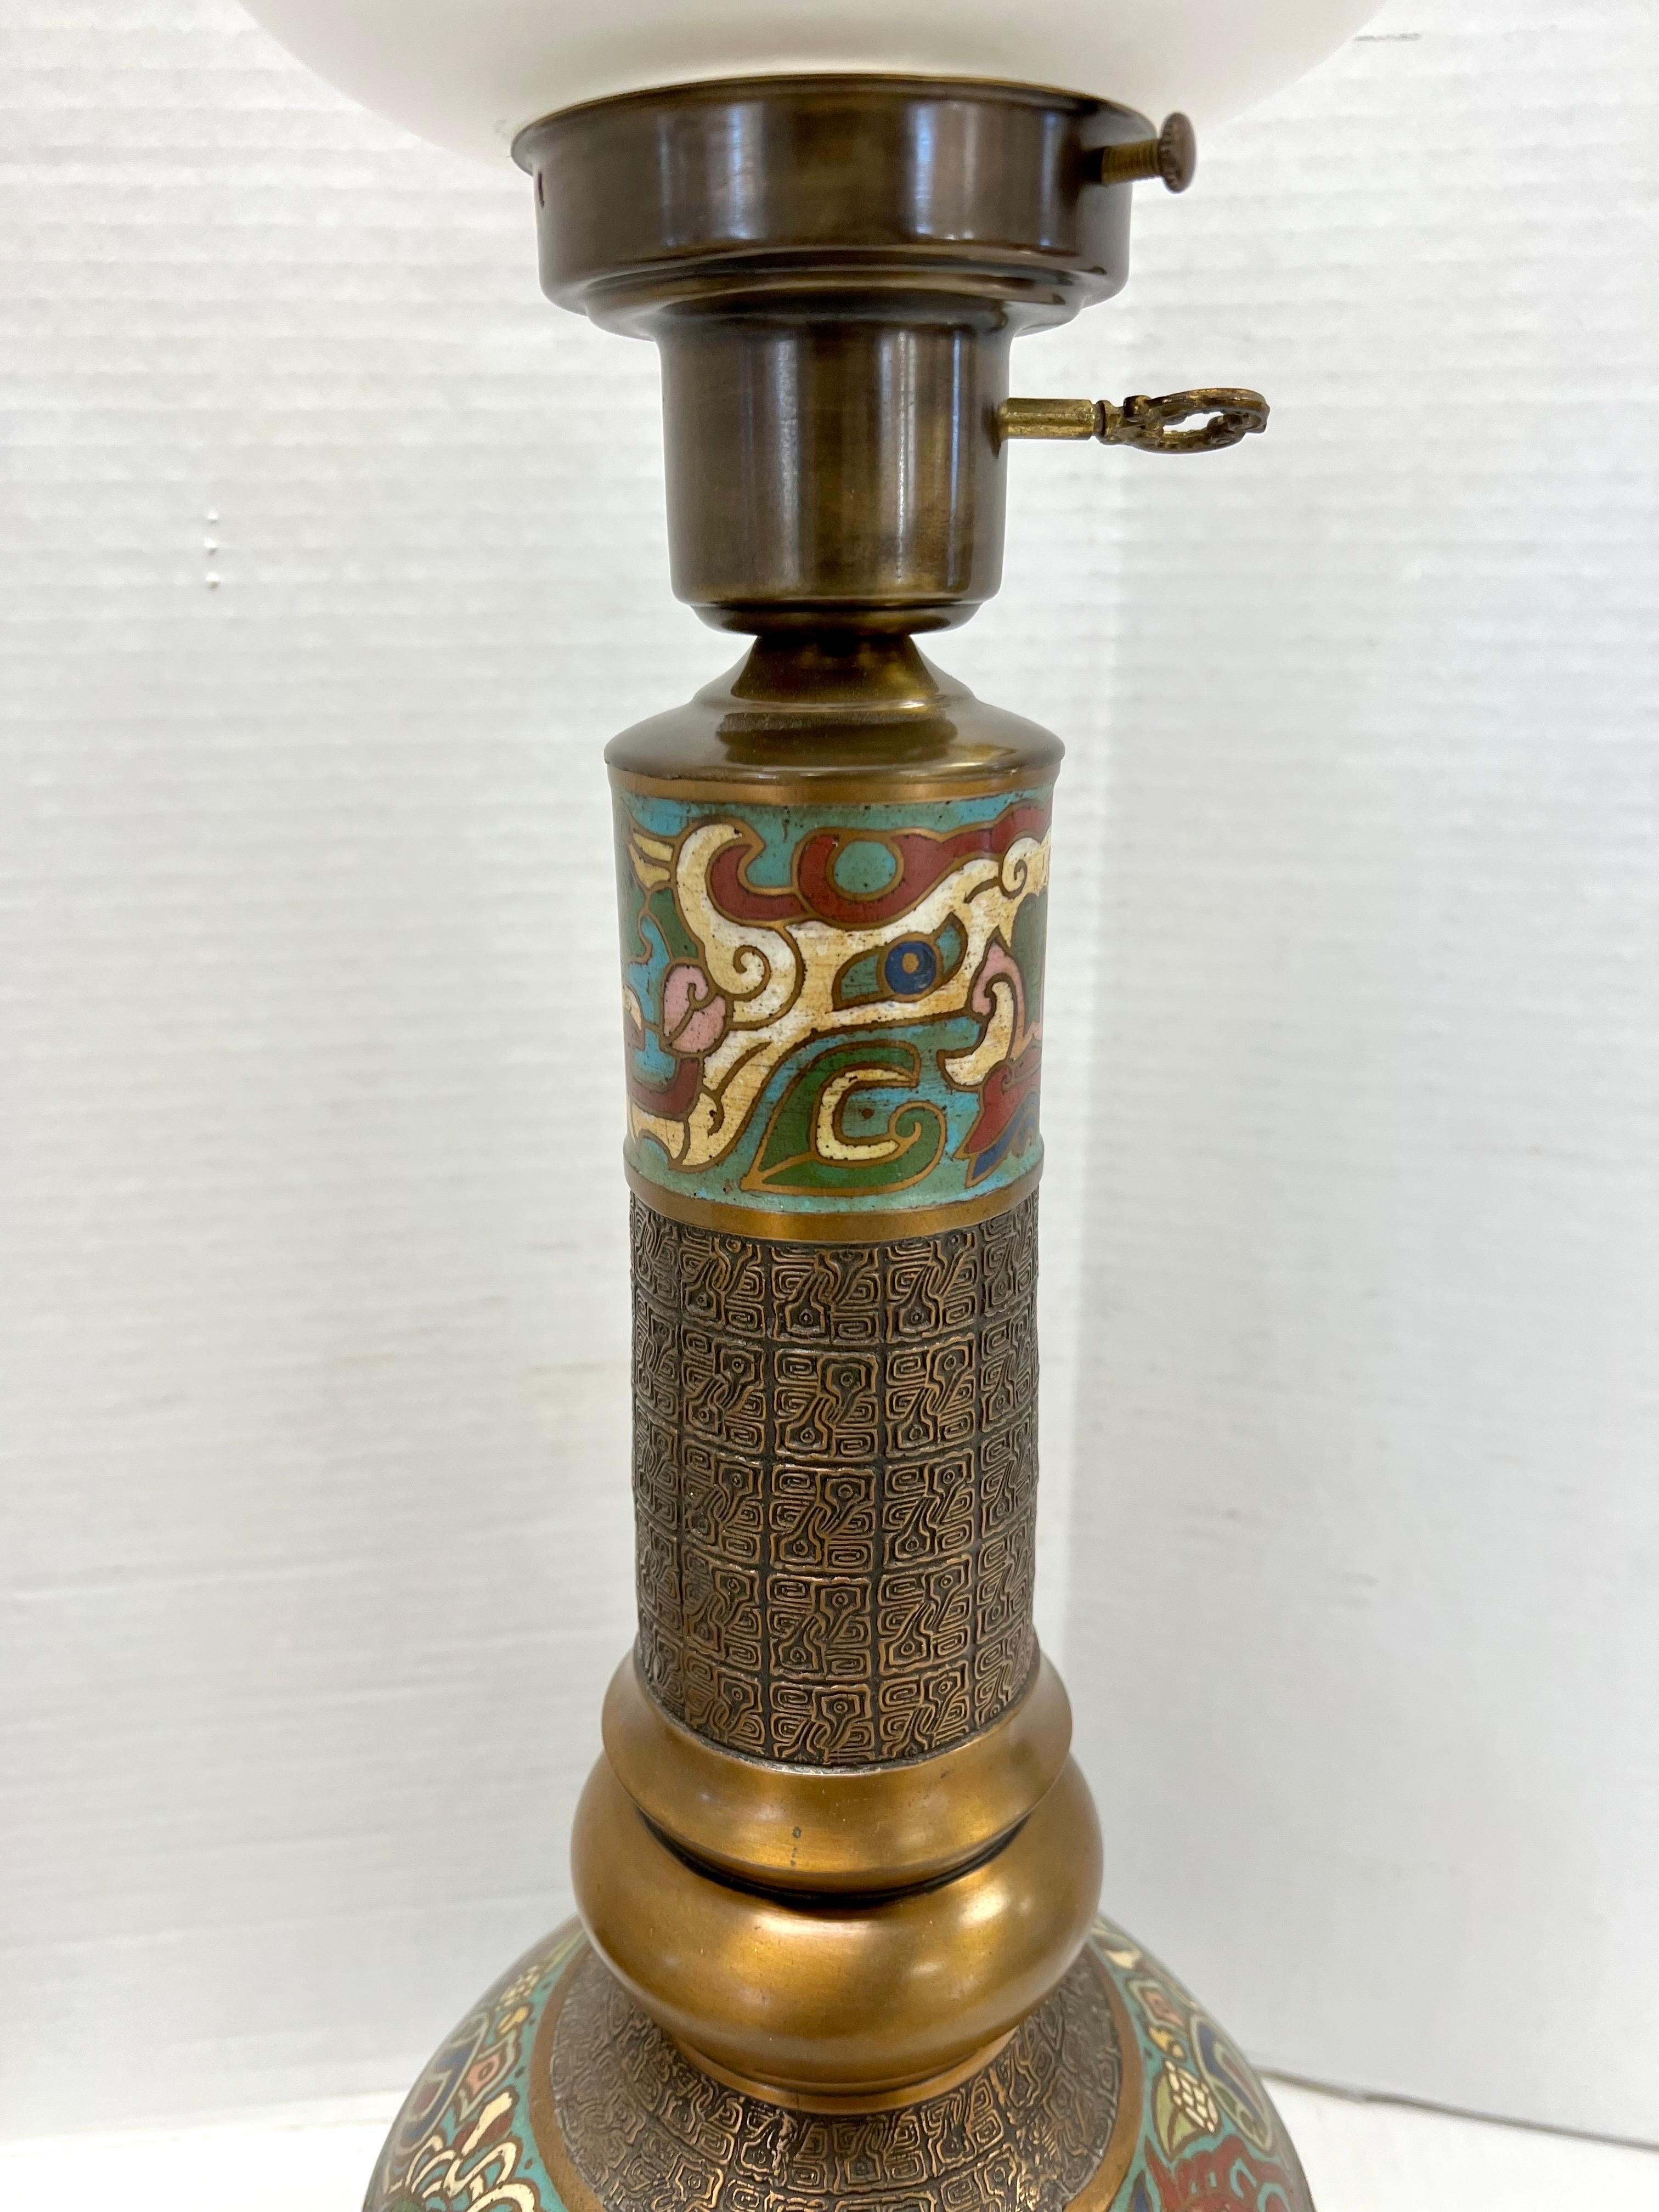 Stunning Japanese brass champleve table lamp with colorful enamel detail topped with an etched glass hurricane lamp. Why not own the best? Wired for USA and in working order.